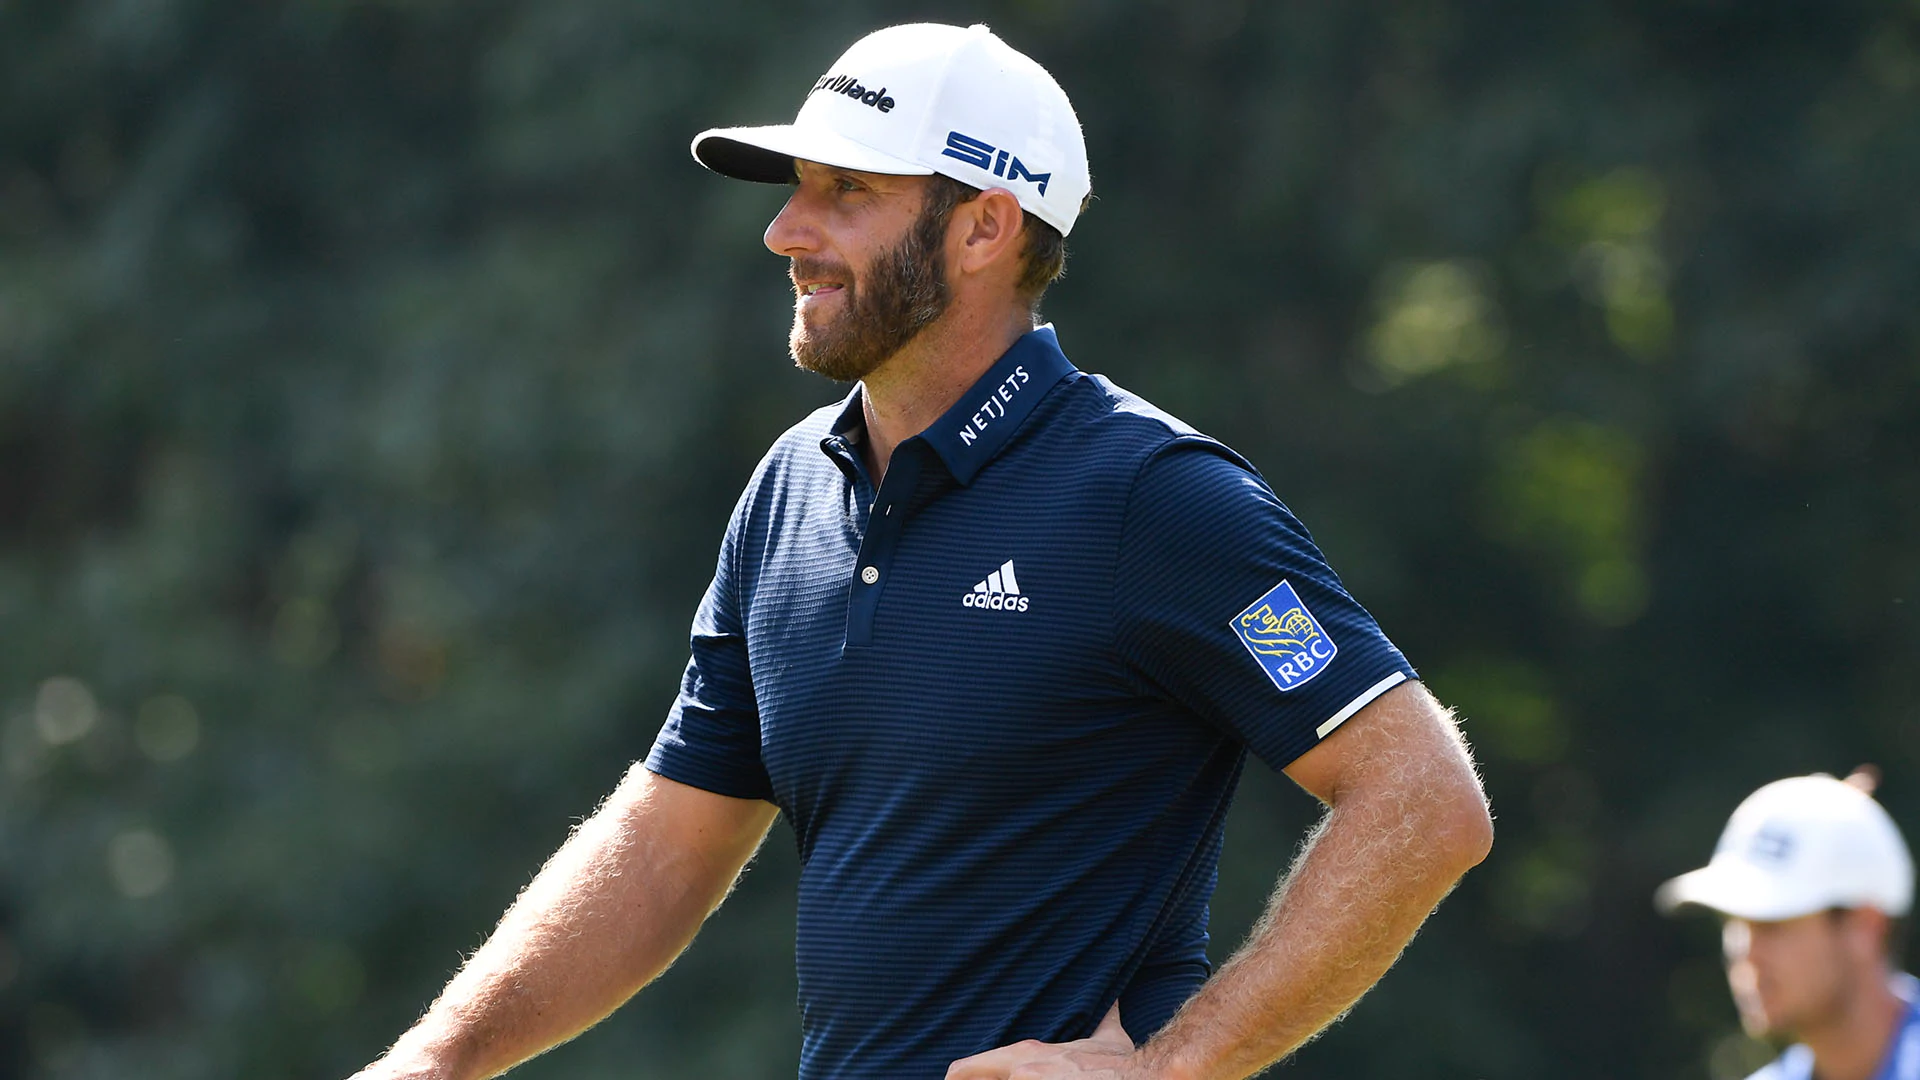 Dustin Johnson looks to protect No. 1 spot following Northern Trust rout